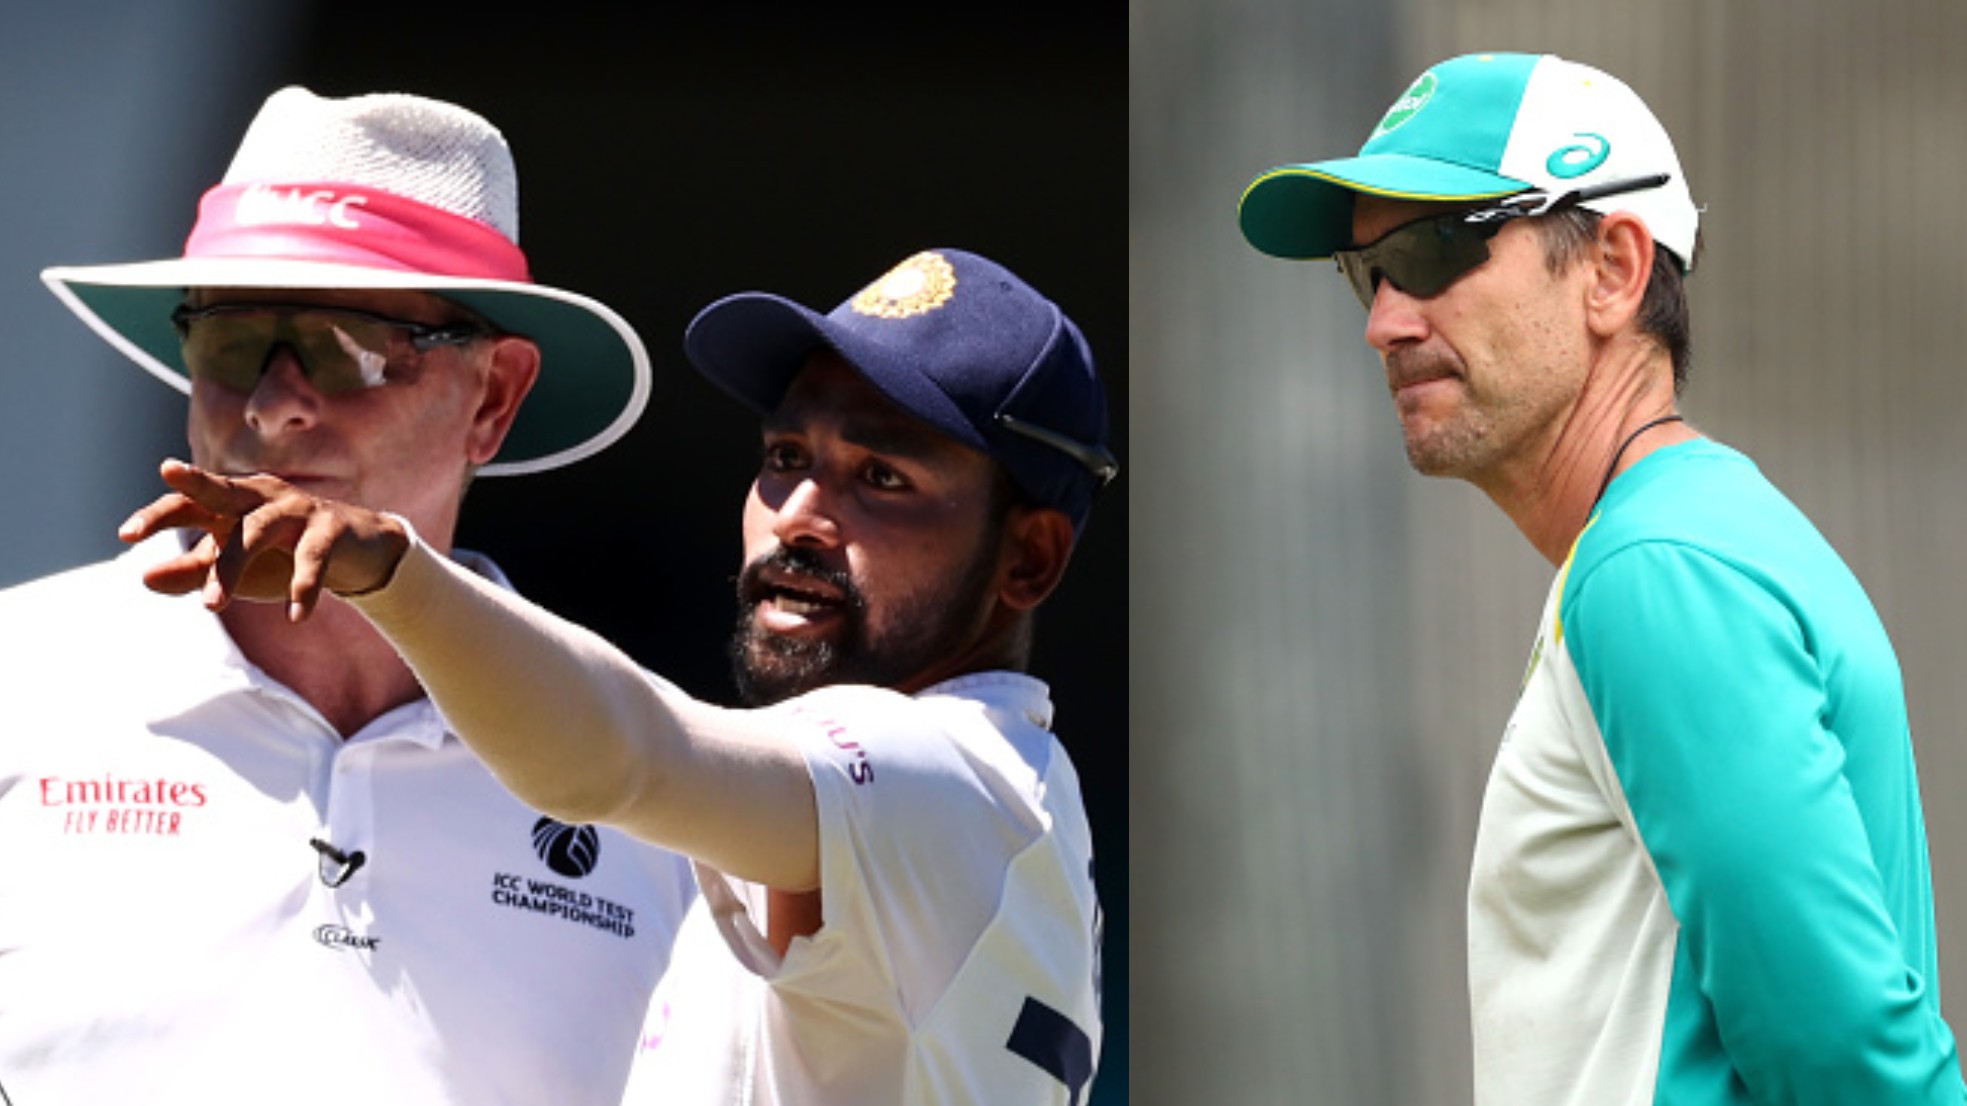 AUS v IND 2020-21: “It’s a shame,” says Australia coach Justin Langer on Indian players racially abused